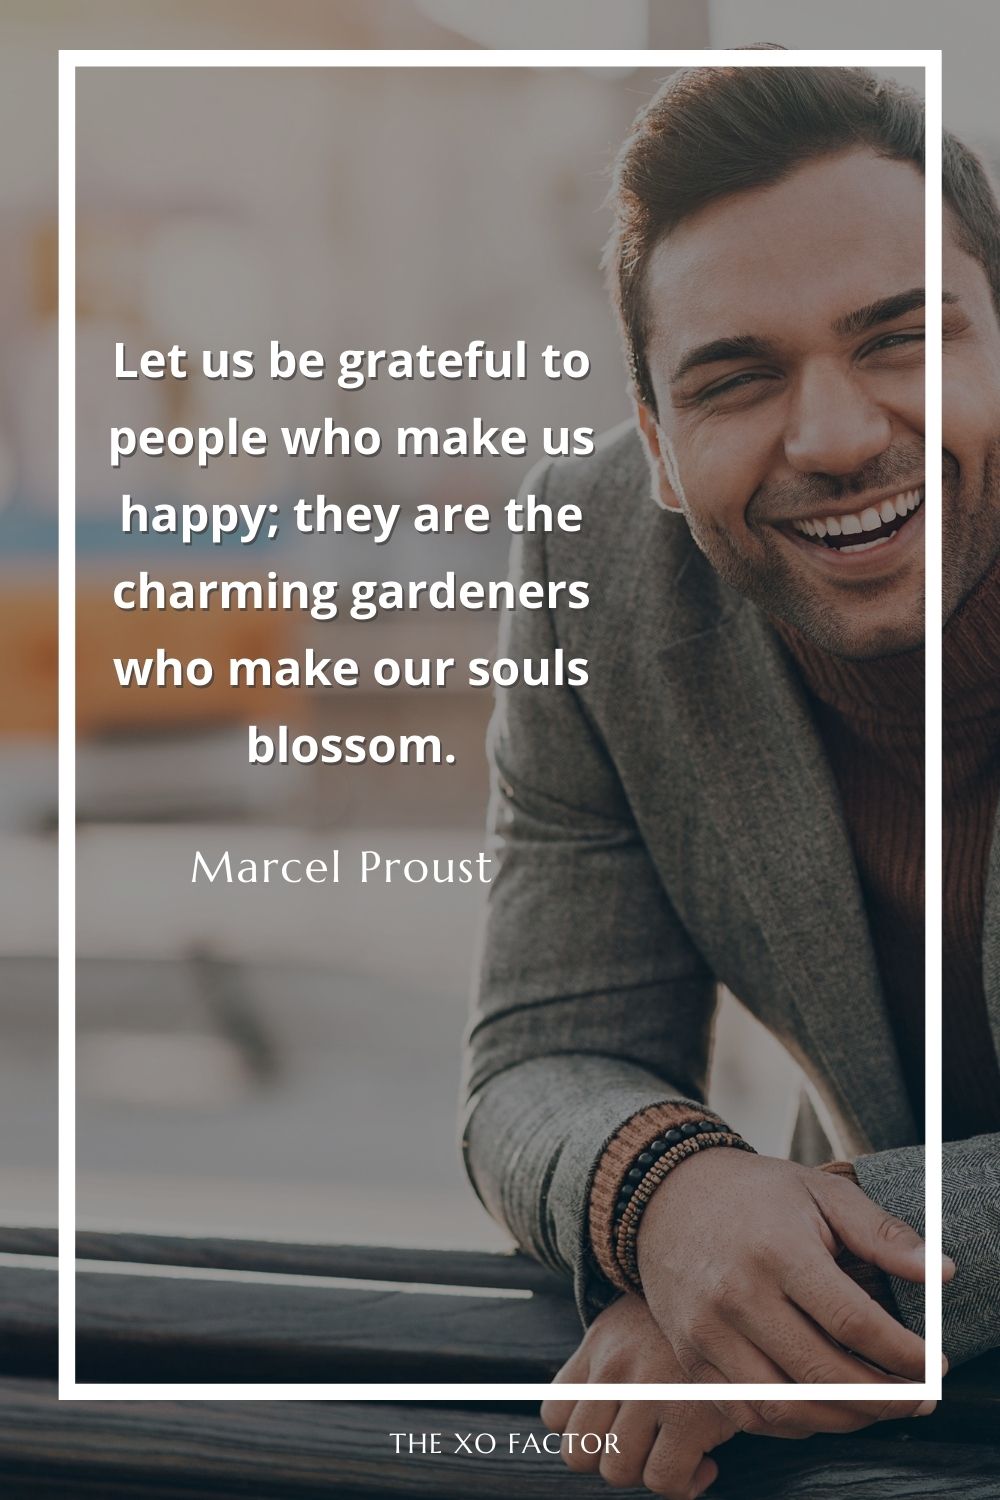 Let us be grateful to people who make us happy; they are the charming gardeners who make our souls blossom.